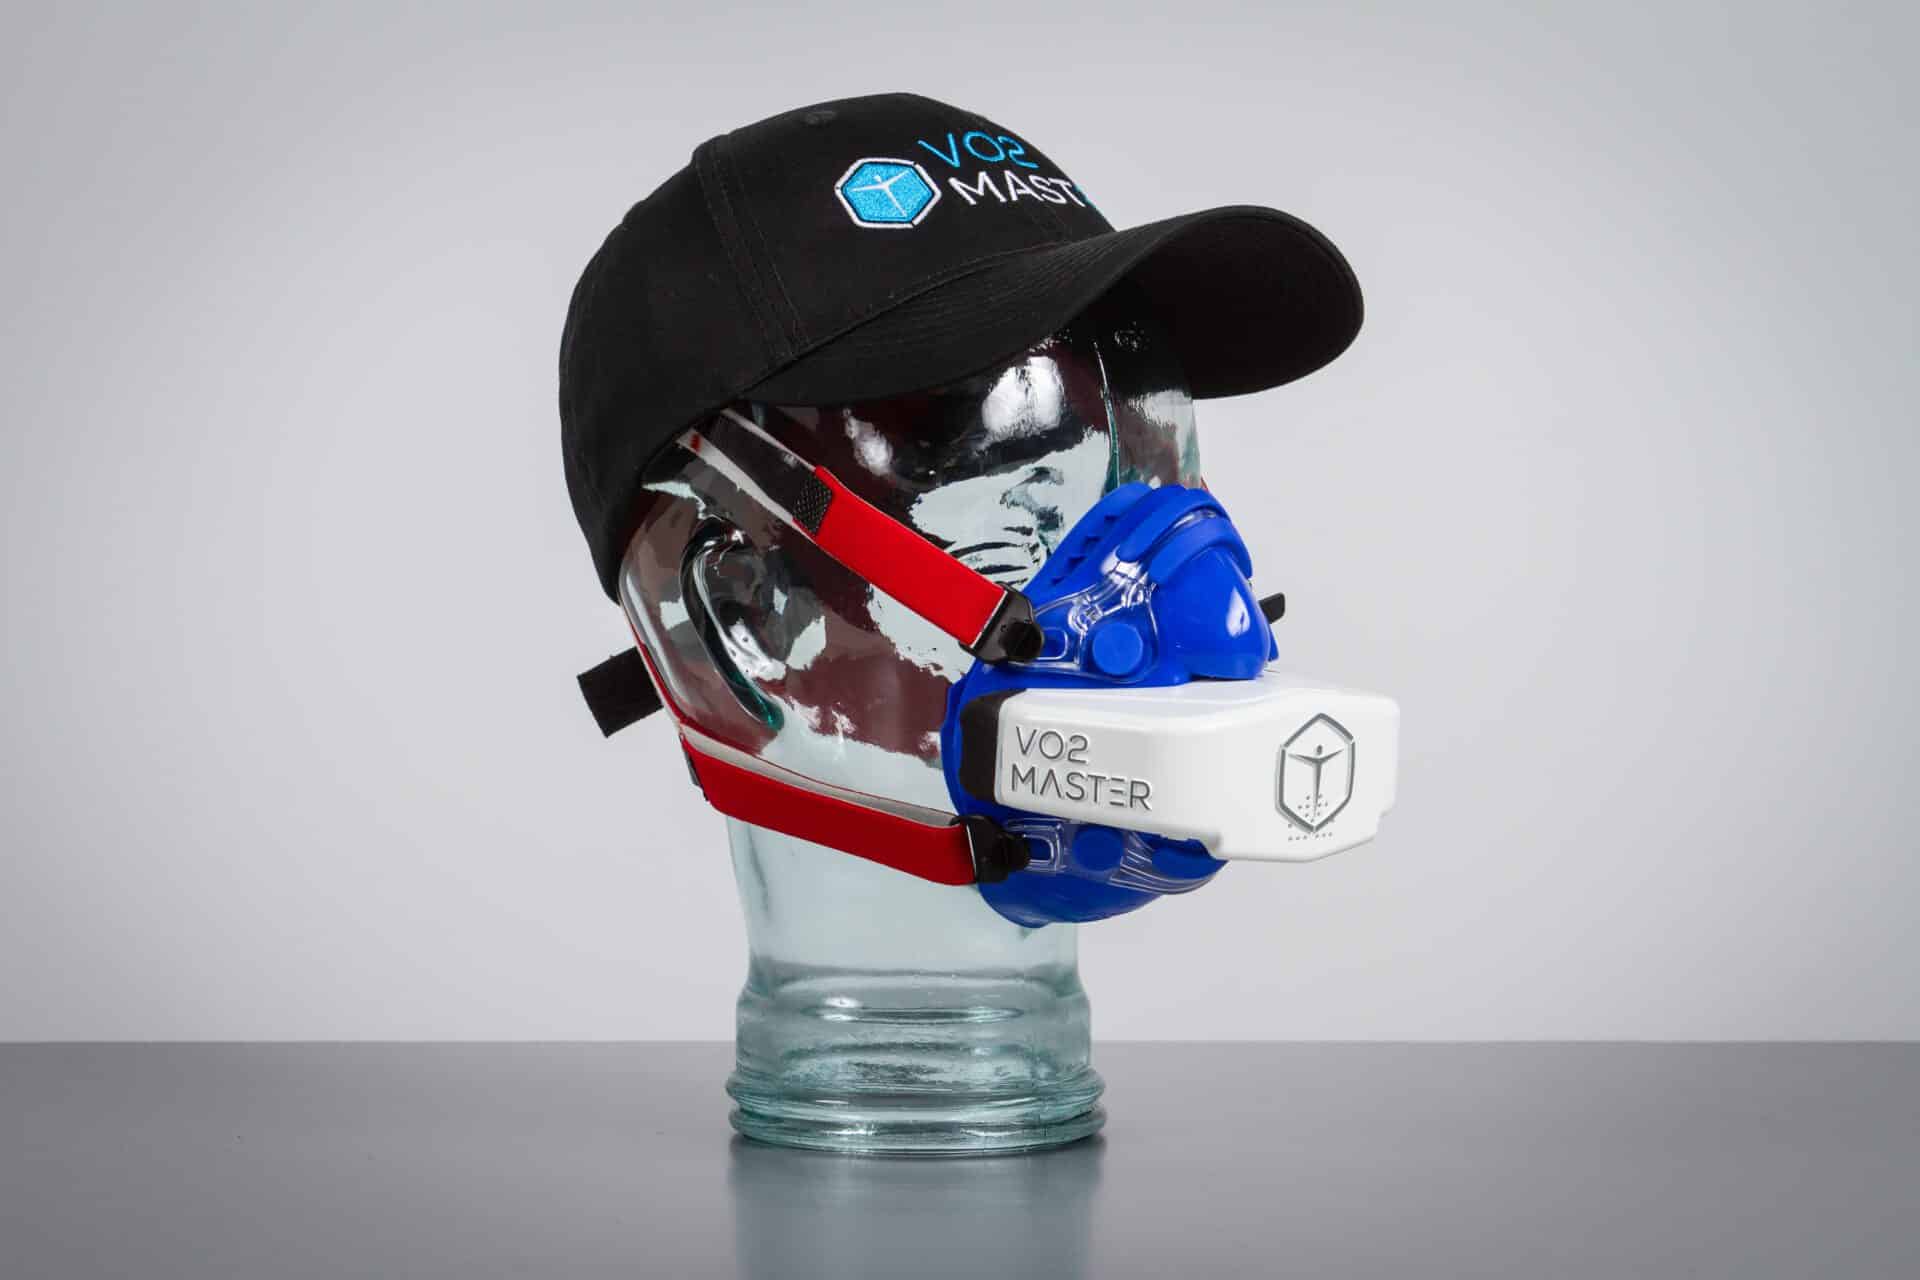 Glass mannequin wearing VO2 Master merch hat and blue Hans Rudolph mask with the analyzer